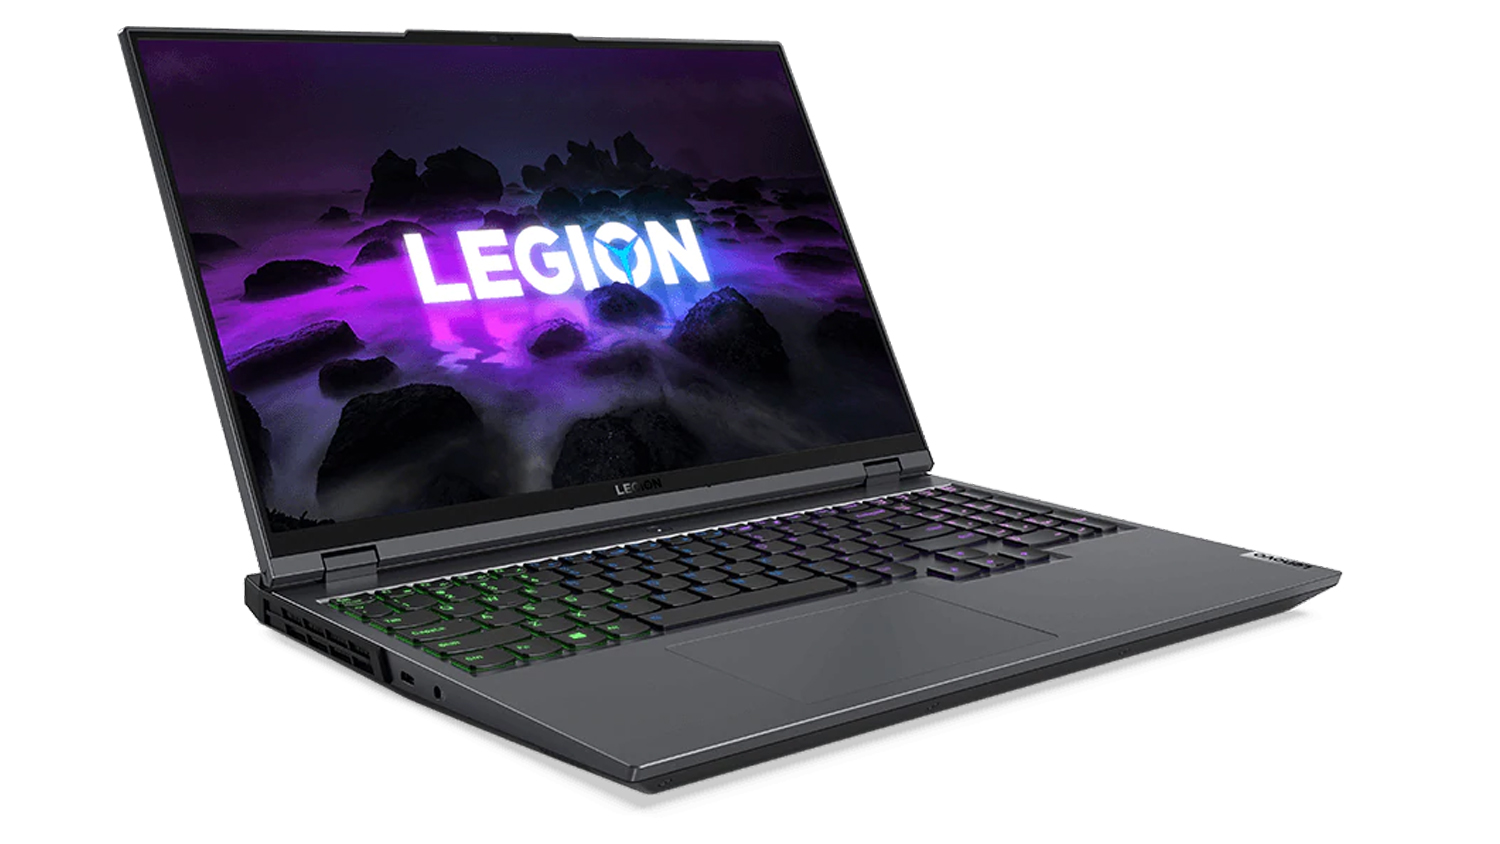 Lenovo Legion 5 Pro on a white background. The laptop is open, and there's a colorful background on the display with the Legion logo and what looks like black rocks surrounding it.